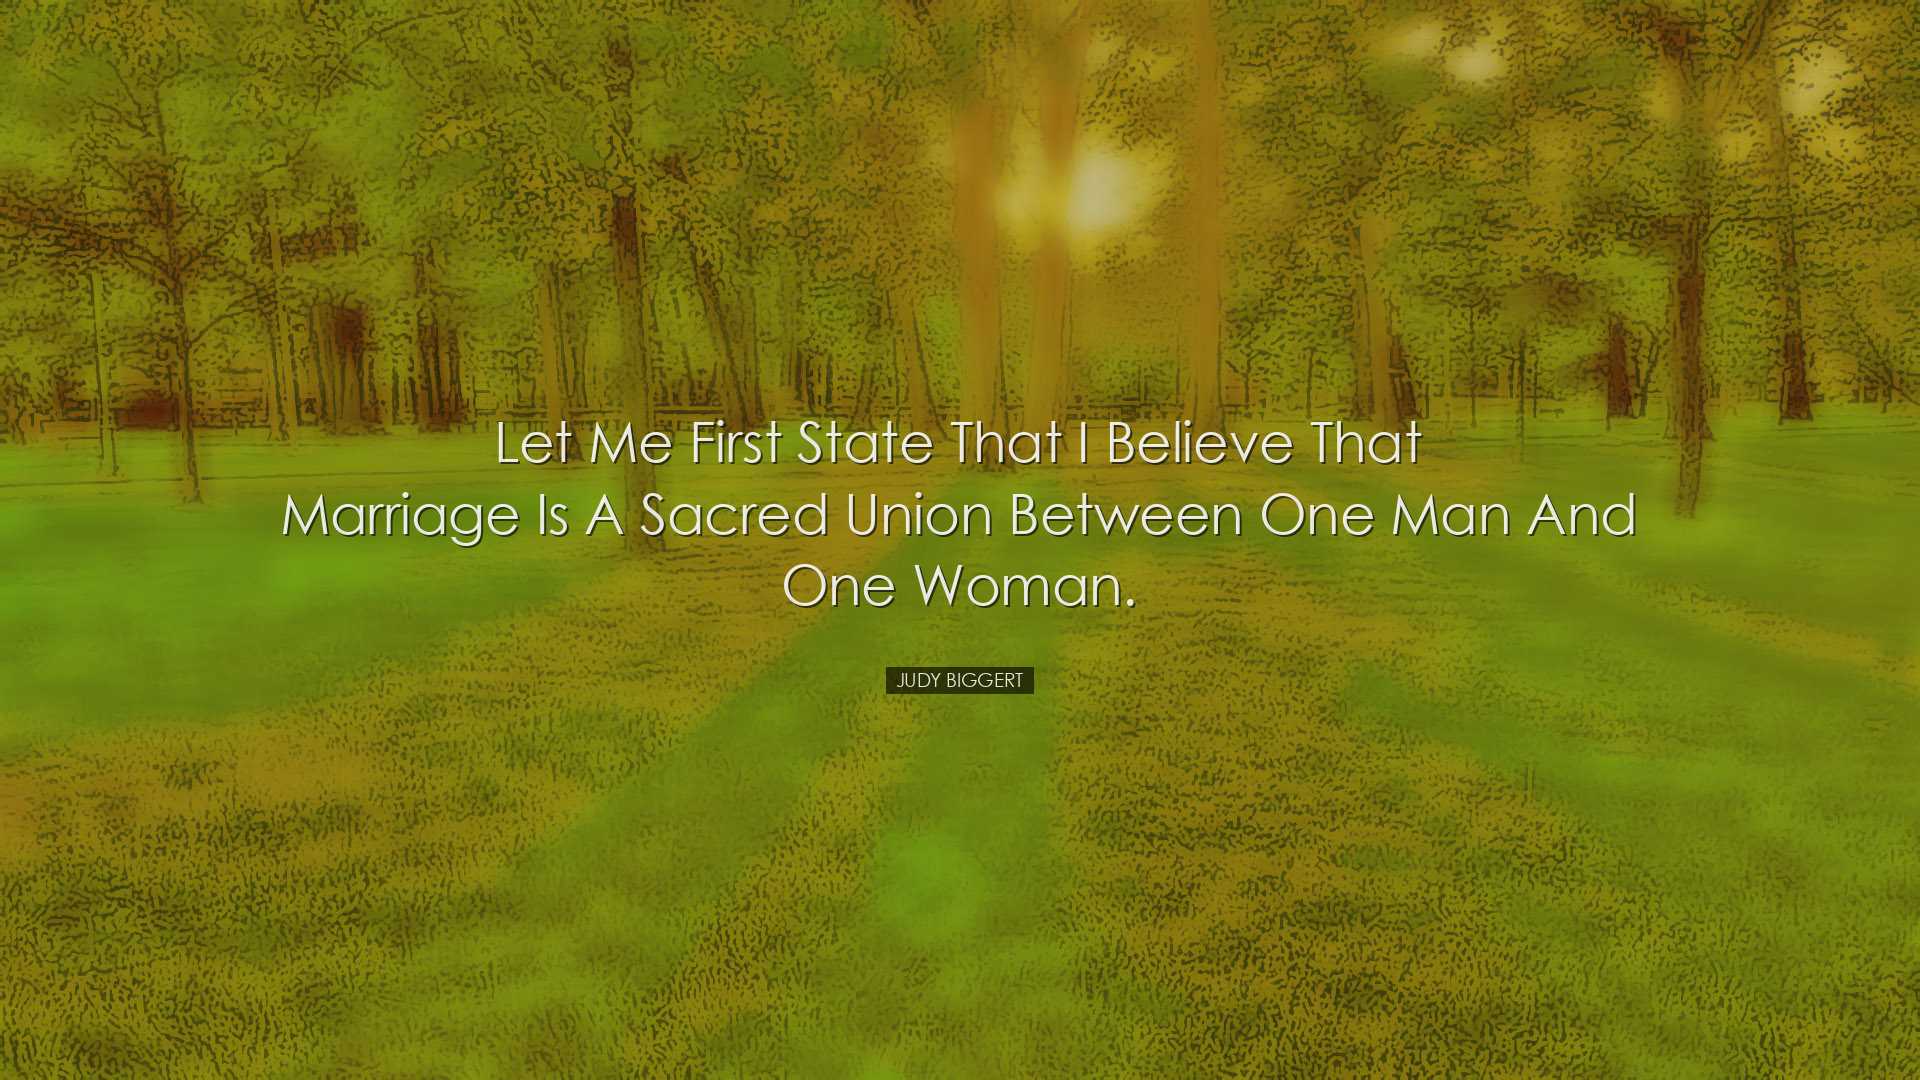 Let me first state that I believe that marriage is a sacred union